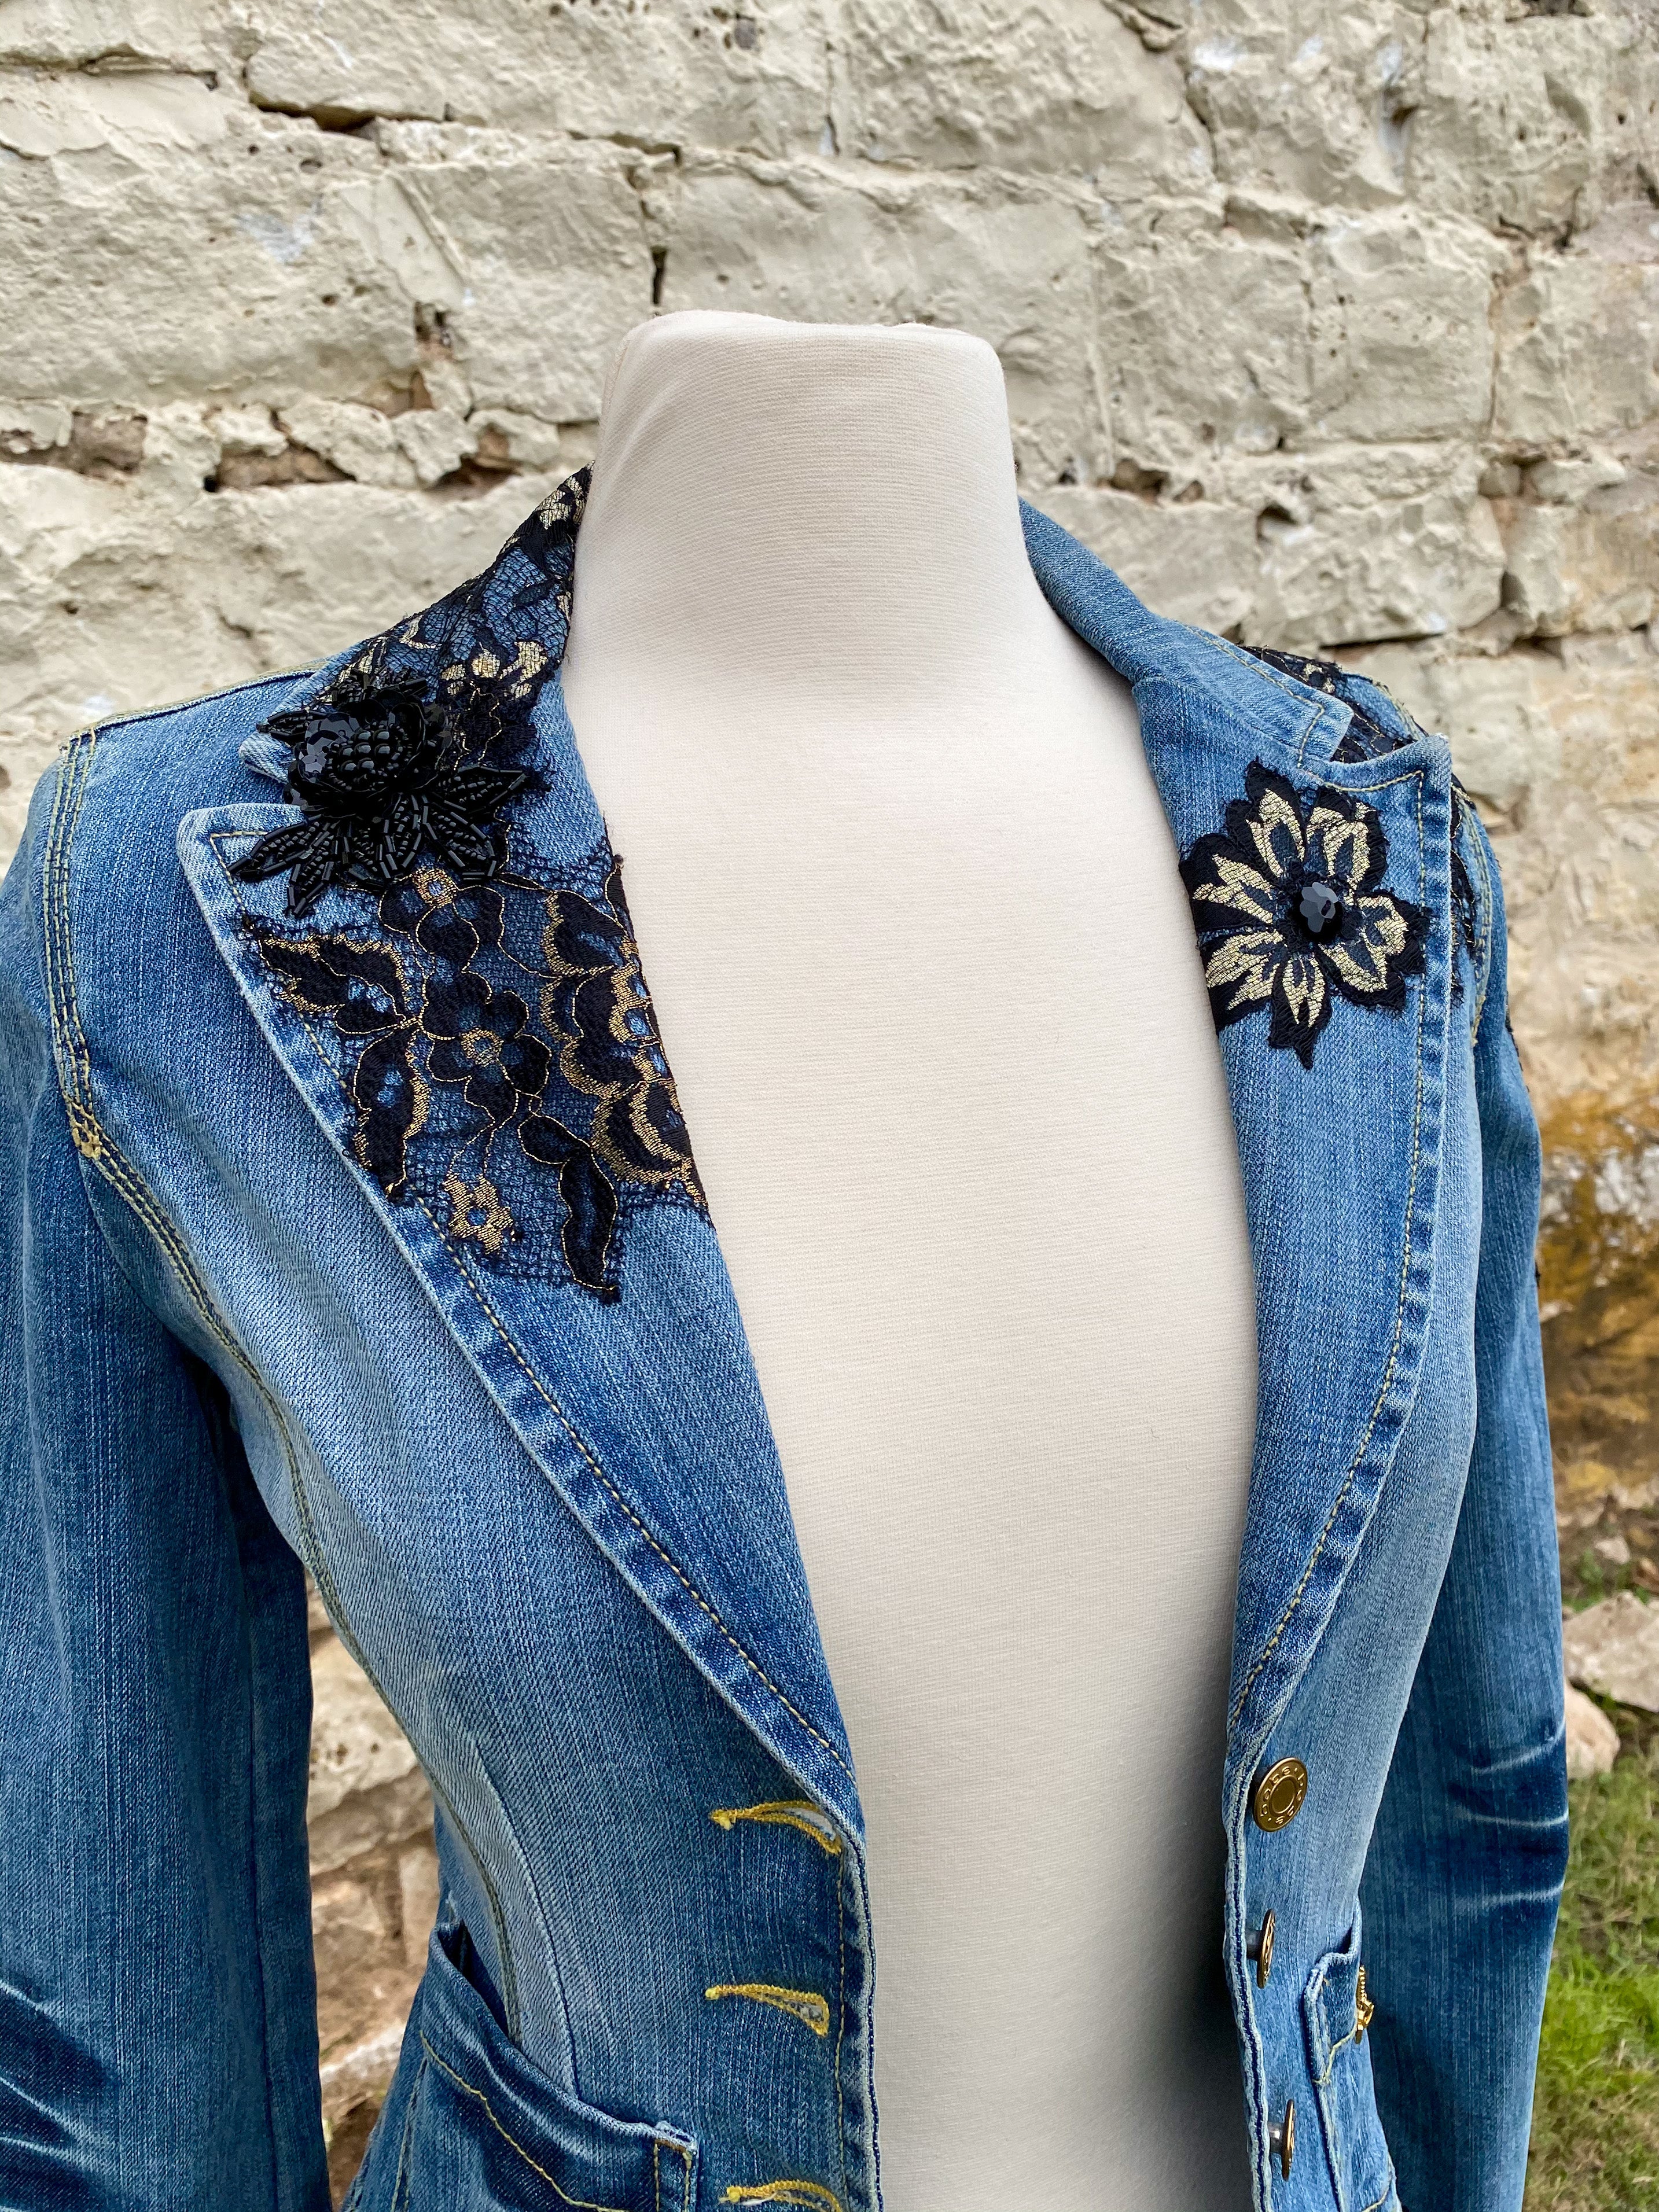 Denim Jacket with Black Lace Appliques and Long Black Lace Skirt XS